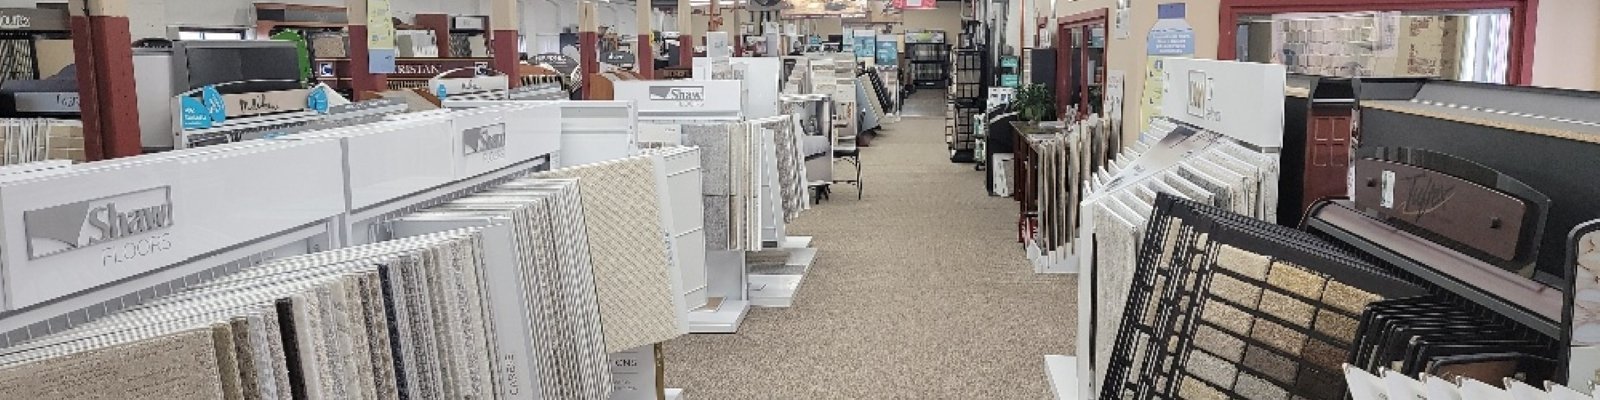 Find a variety of beautiful flooring in all shade and finish, from handscraped to high gloss here at your local store